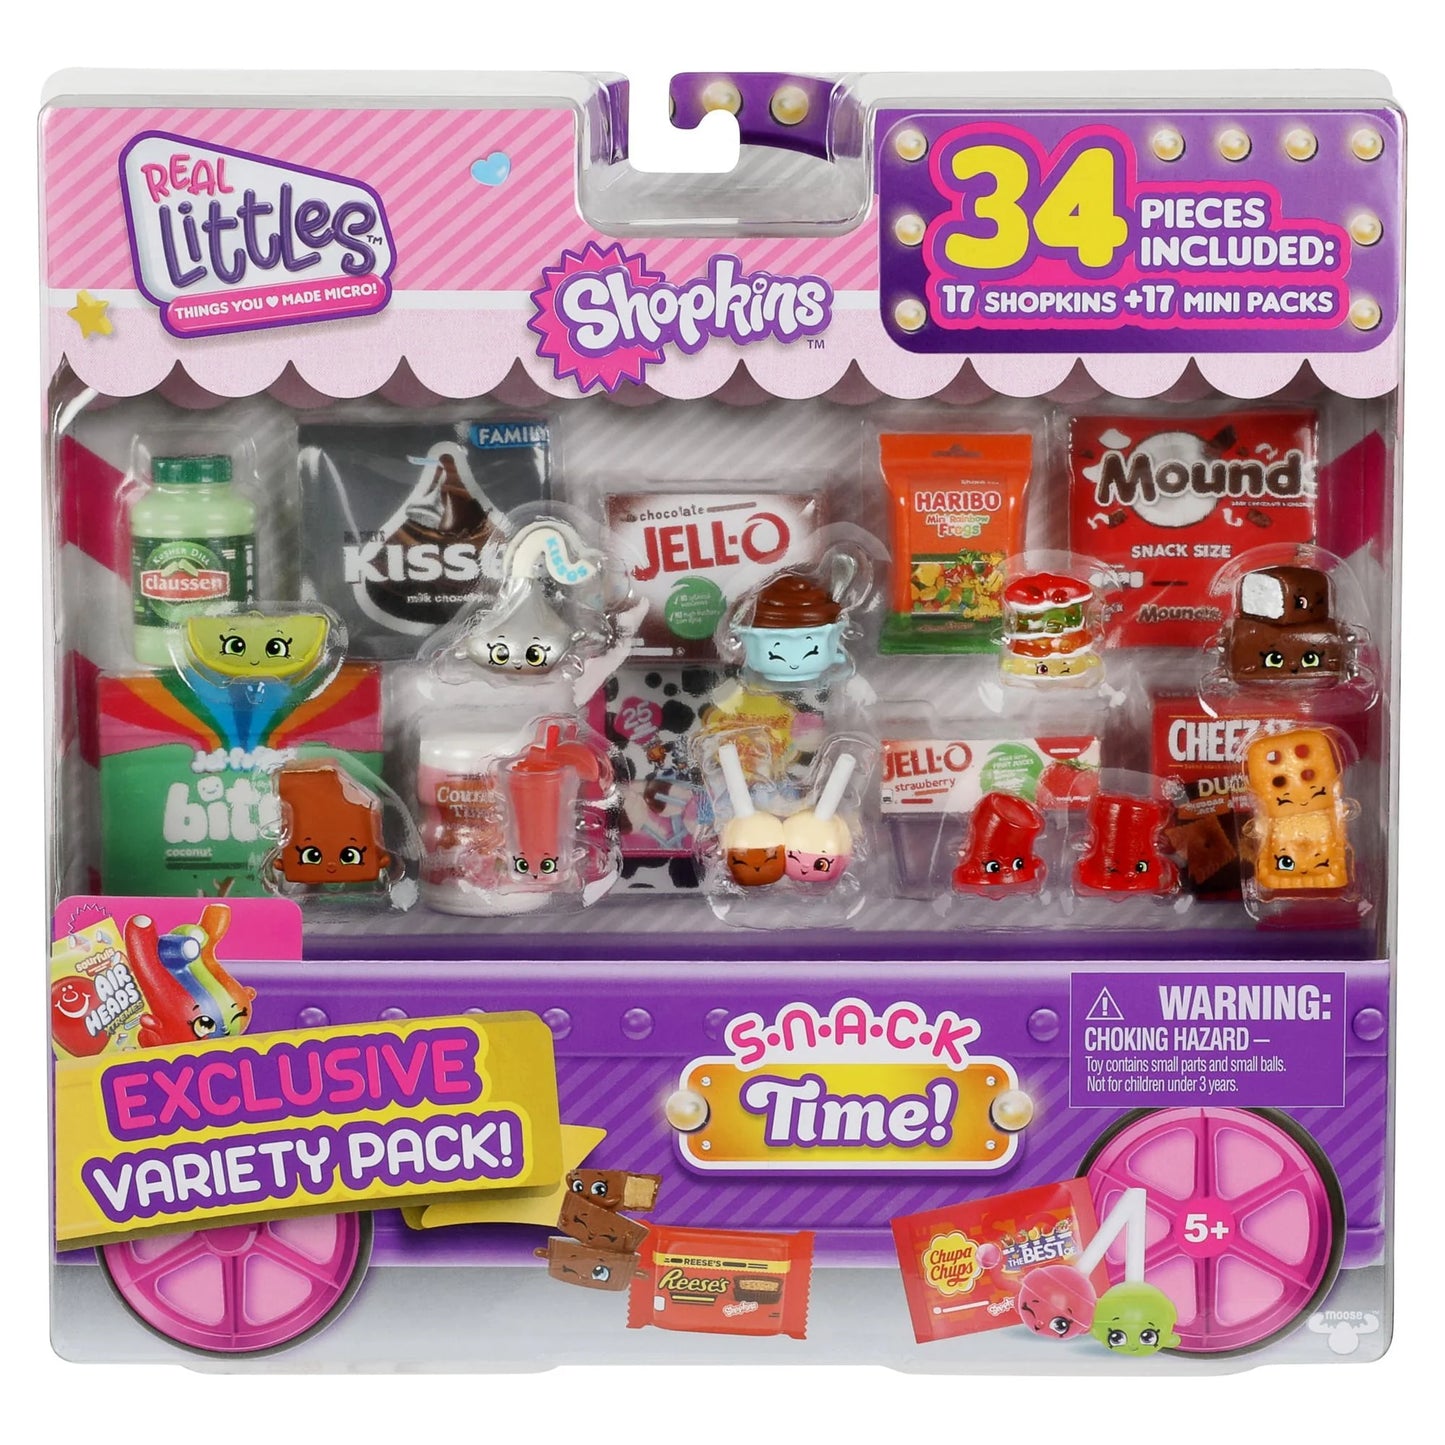 Shopkins Real Littles, Variety Pack, 17 Shopkins Plus 17 Real Branded Mini Packs, 34 Total Pieces, Styles May Vary, Ages 5+